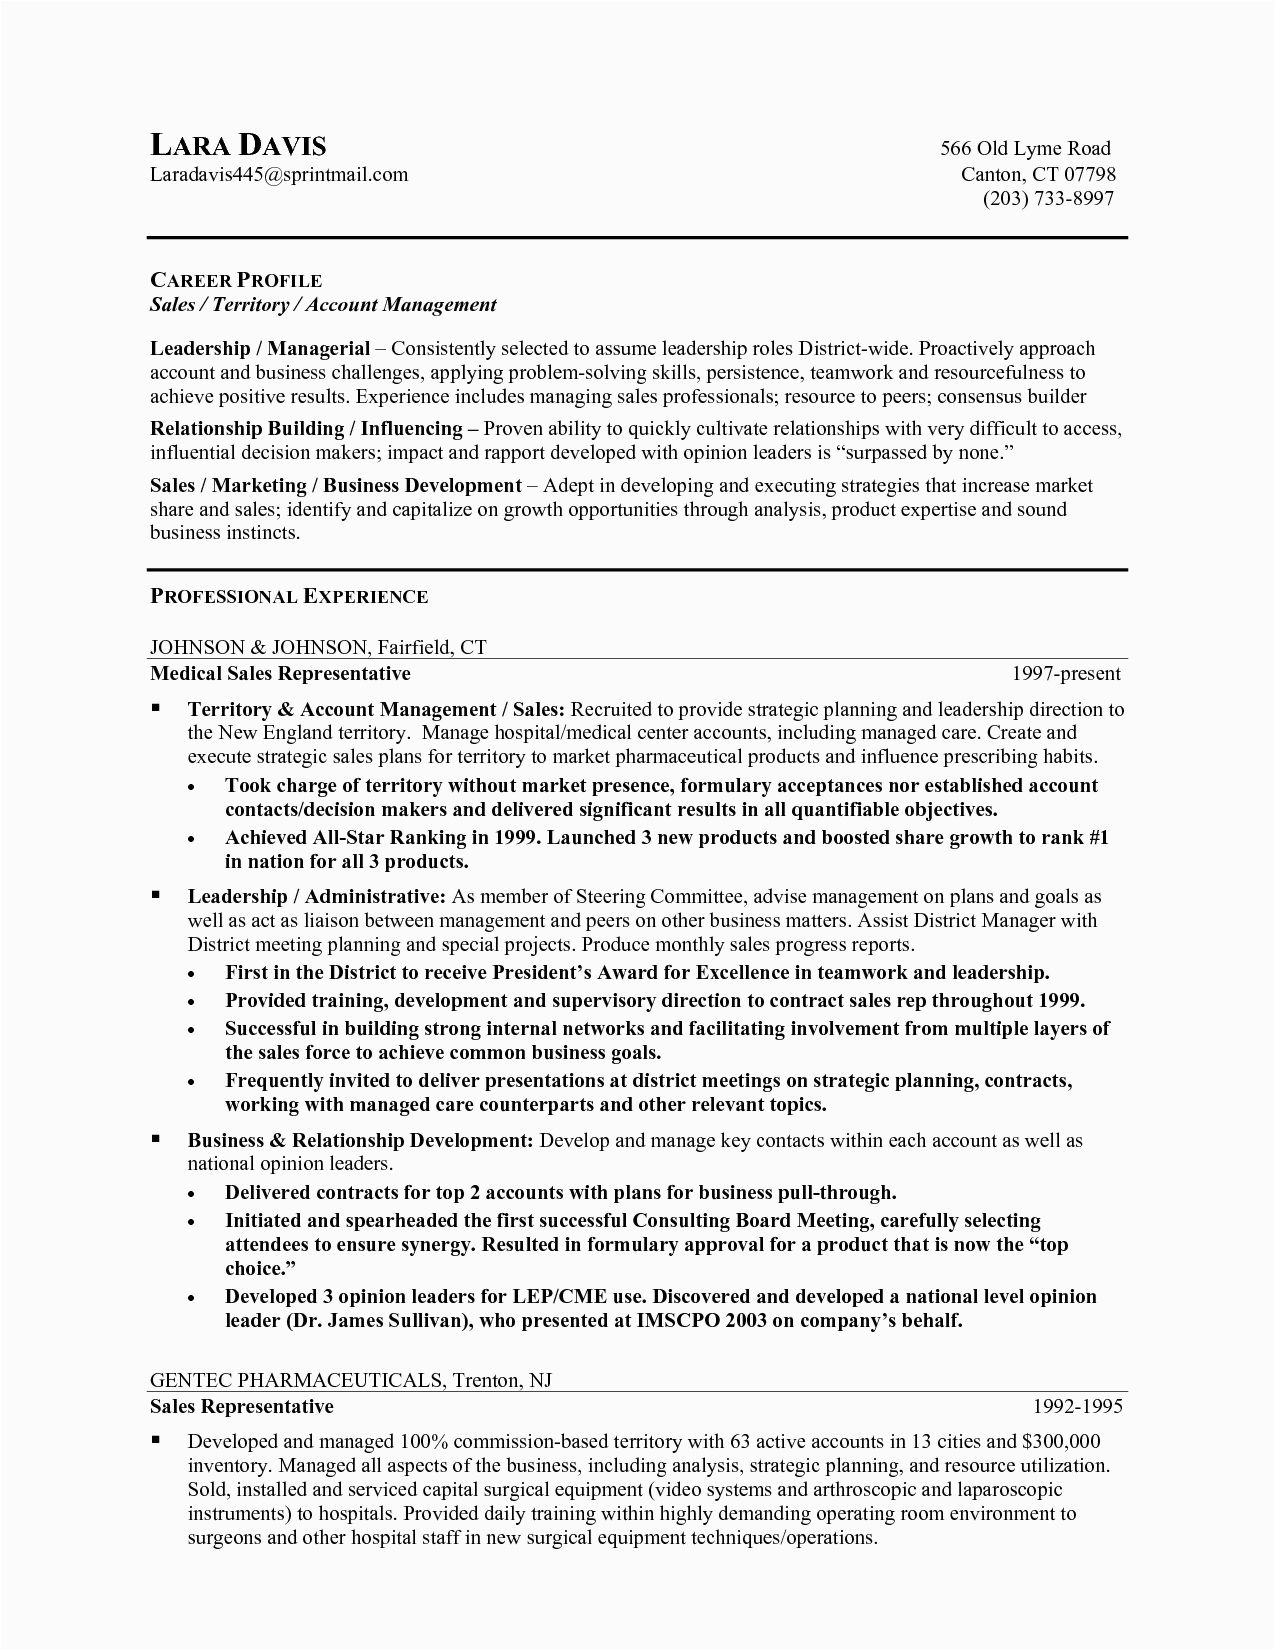 Samples Of Objectives for A Resume In Customer Service Customer Service Sales Resume Objective Examples Free